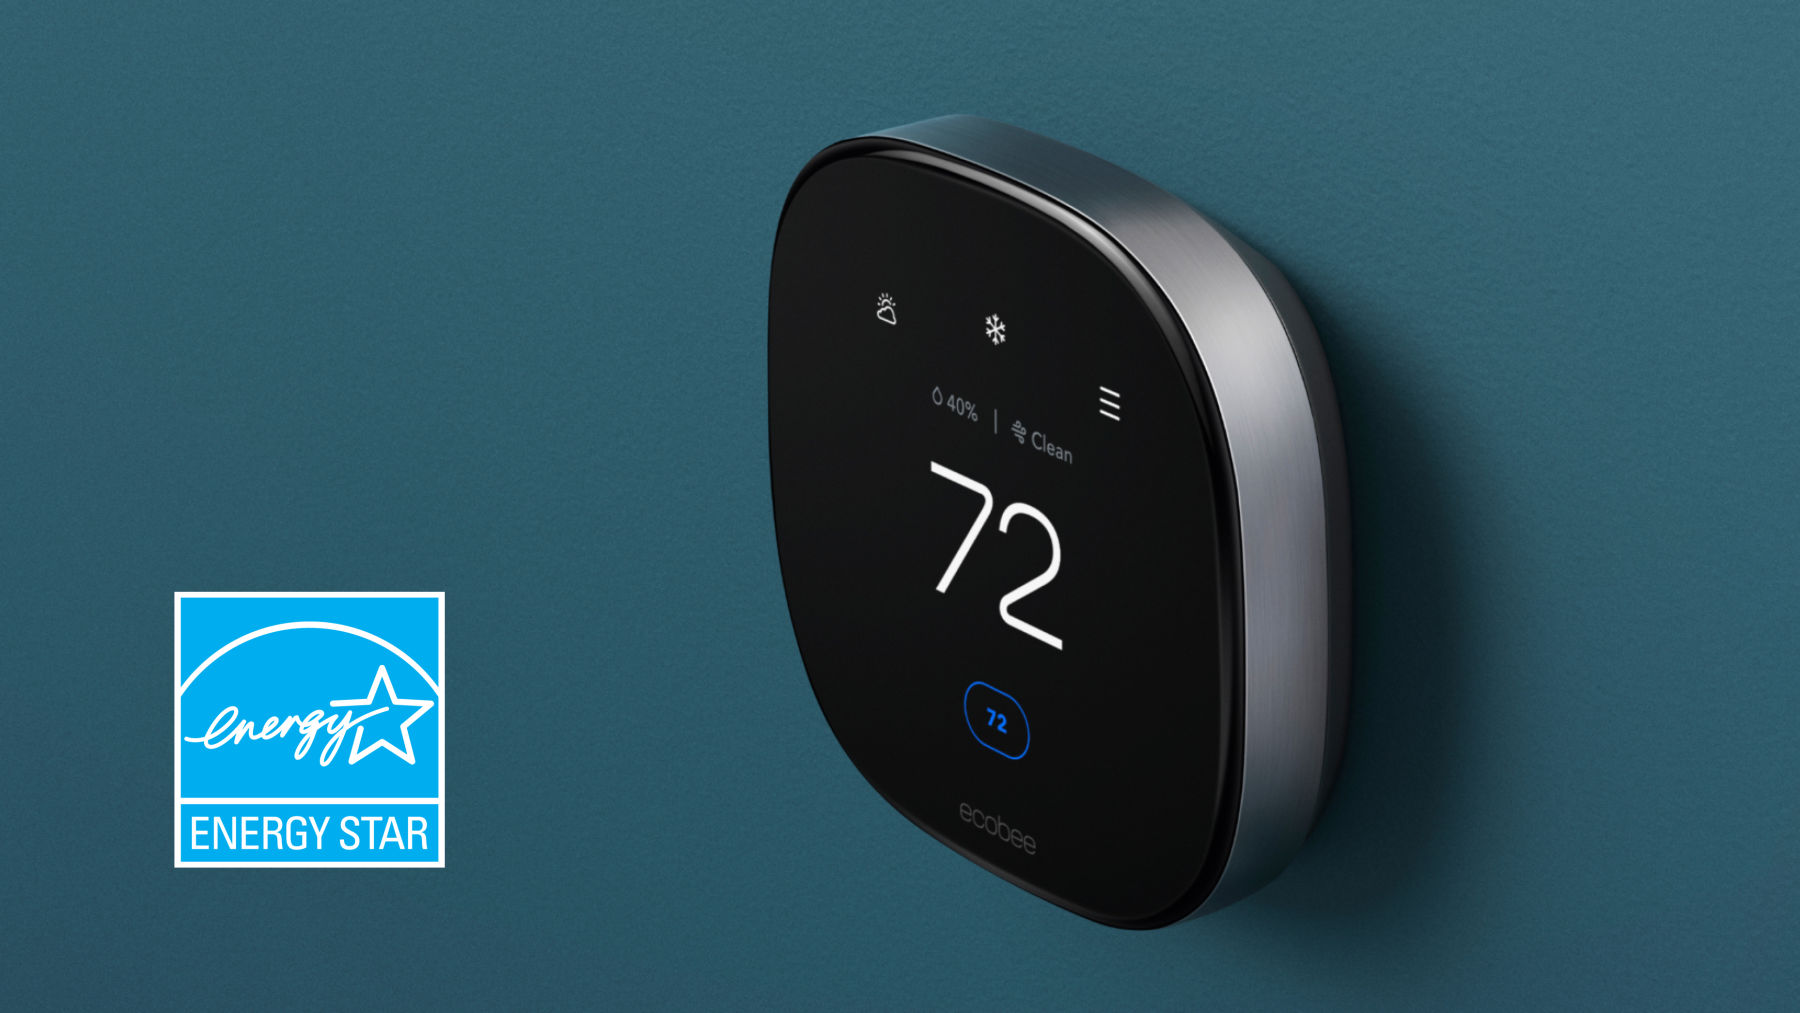 ecobee Smart Thermostat Premium hanging on a blue wall, with the ENERGY STAR logo on the bottom left of the image